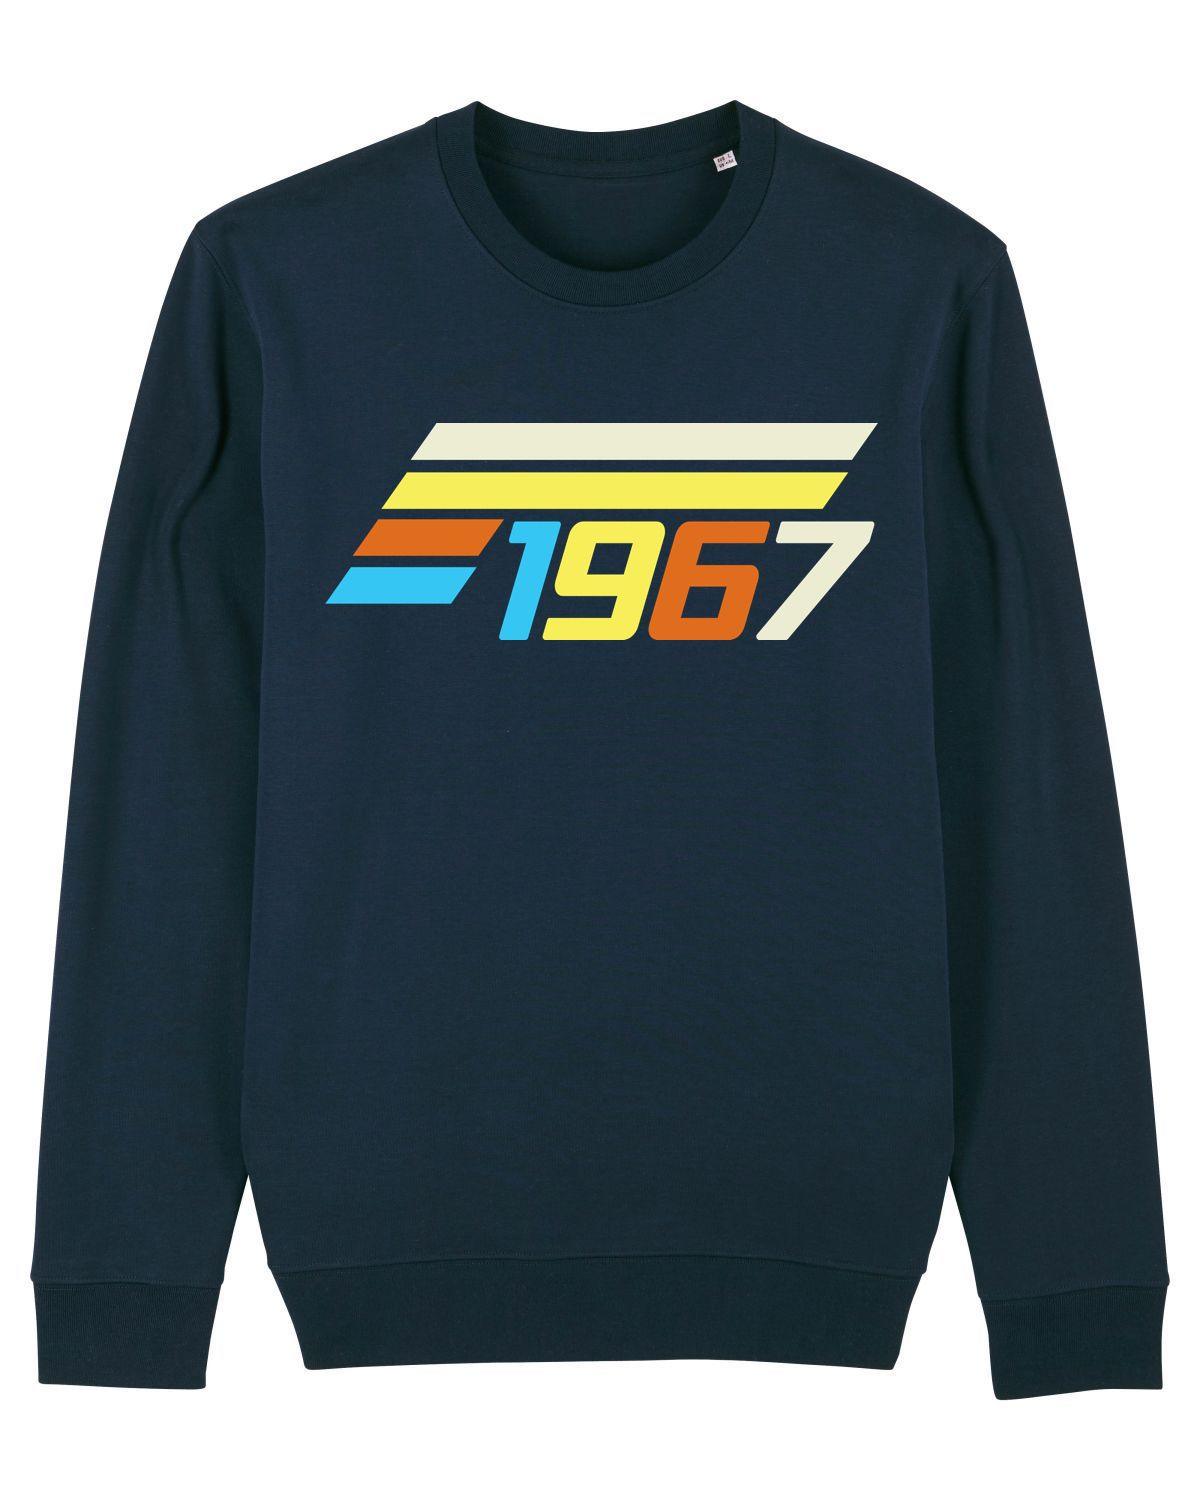 THIS IS MY NUMBER: Sweatshirt: Bespoke With Your Own Numbers (2 Colour Options) - SOUND IS COLOUR